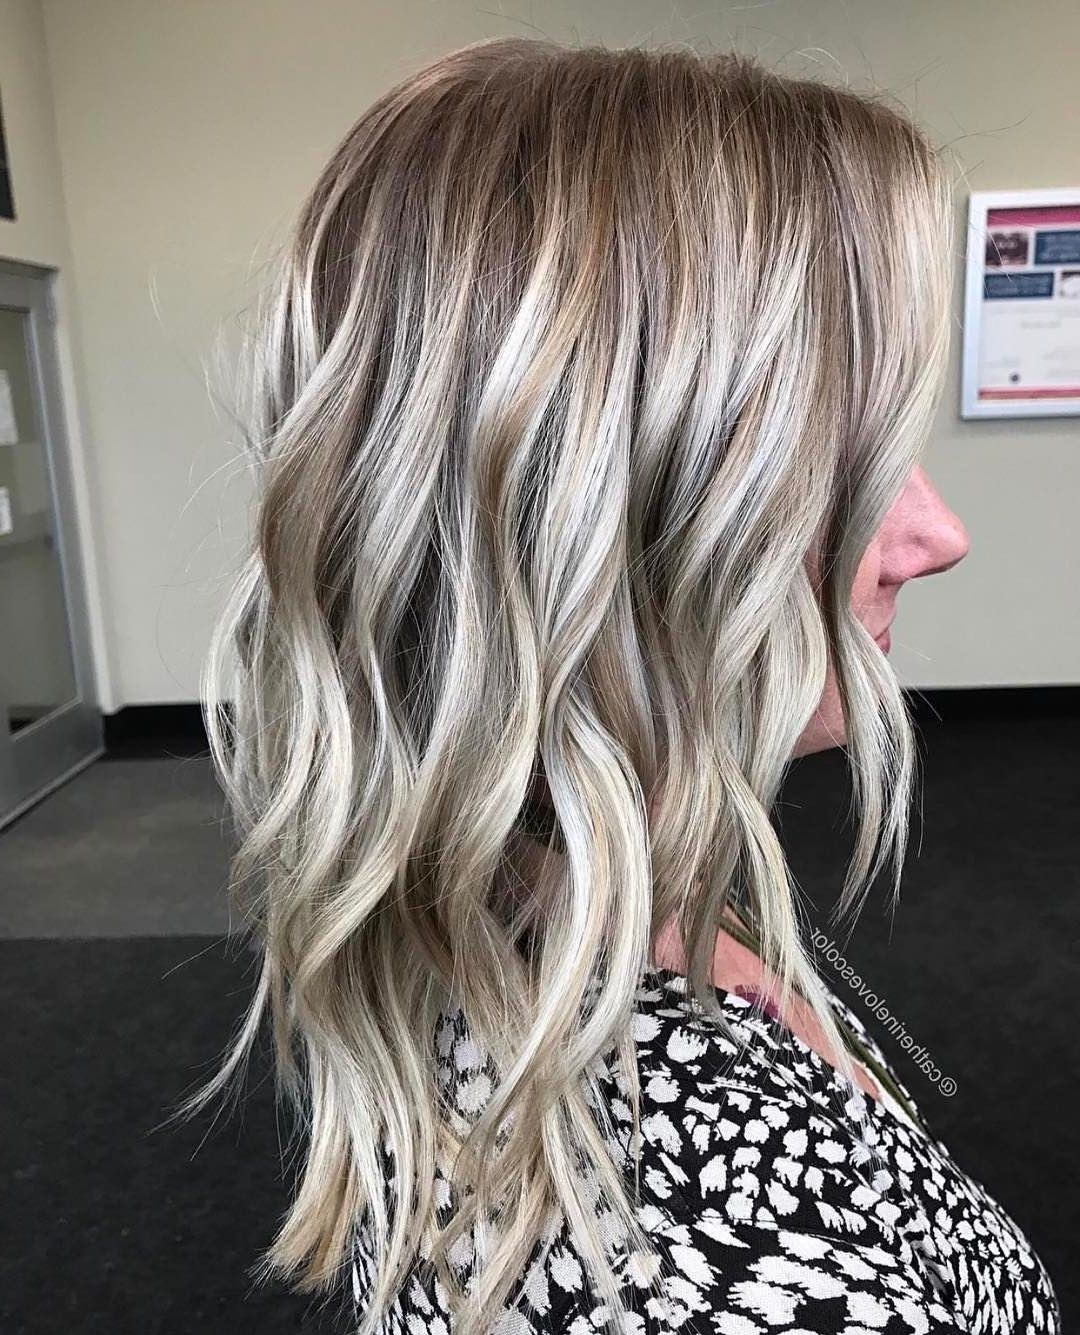 Most Recent Curly Highlighted Blonde Bob Hairstyles Throughout 20 Adorable Ash Blonde Hairstyles To Try: Hair Color Ideas  (View 10 of 20)